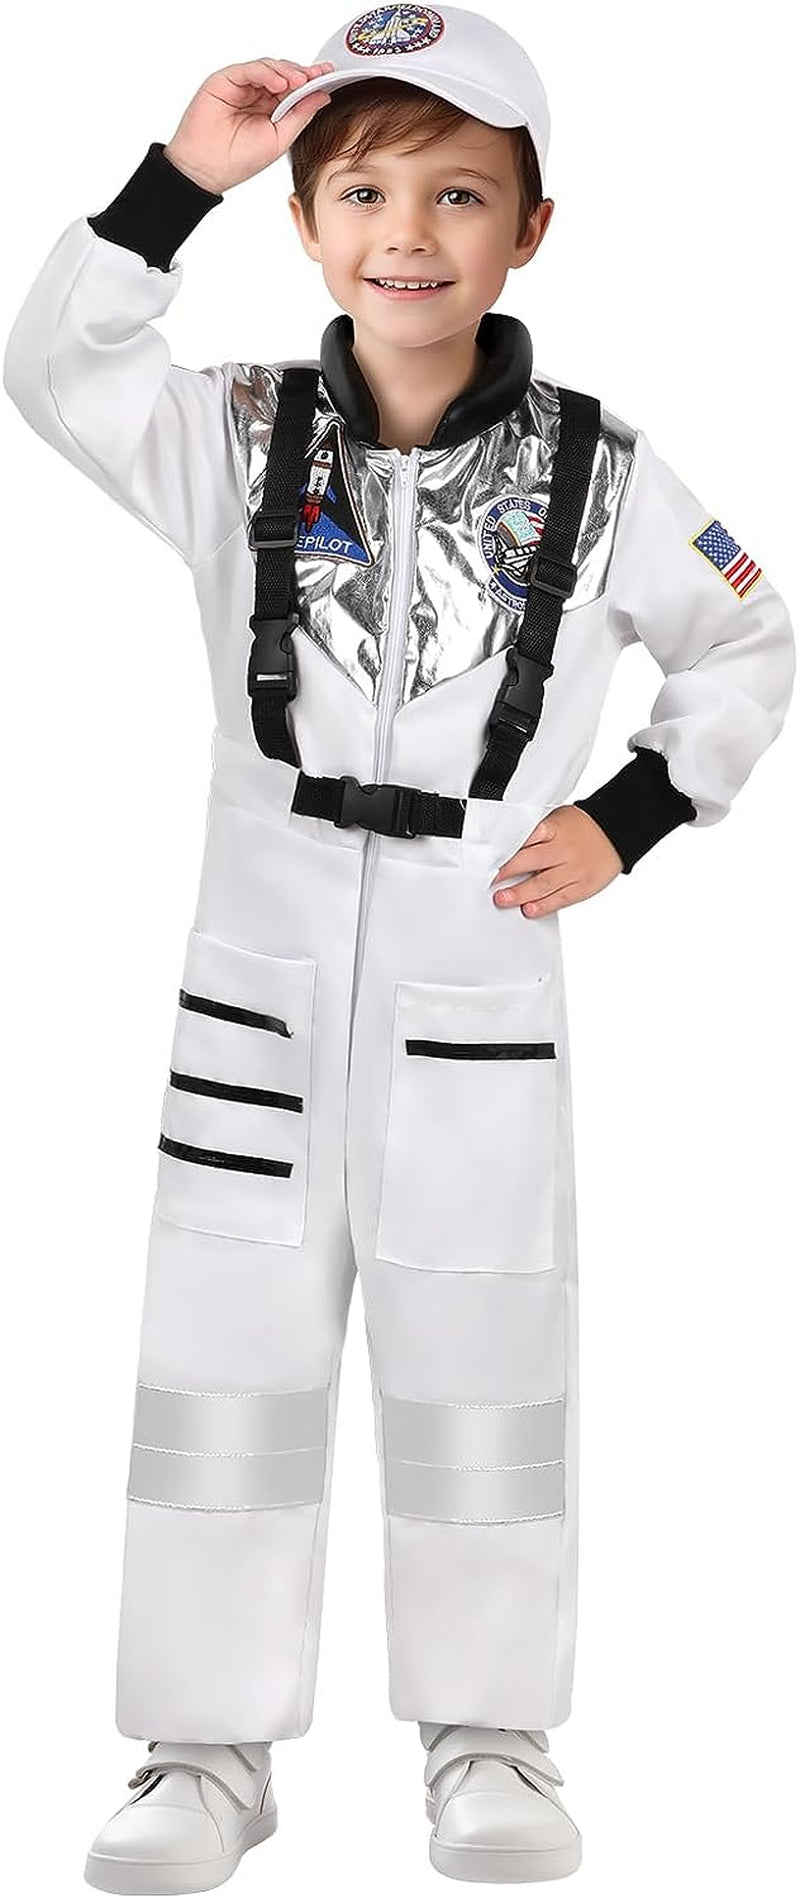 GIFTINBOX Astronaut Costume for Kids Toddler, Halloween Costumes for Boys Girls Kids 3-10, Space Costume Dress up Role Play  GIFTINBOX Medium (7-8 Yrs)  